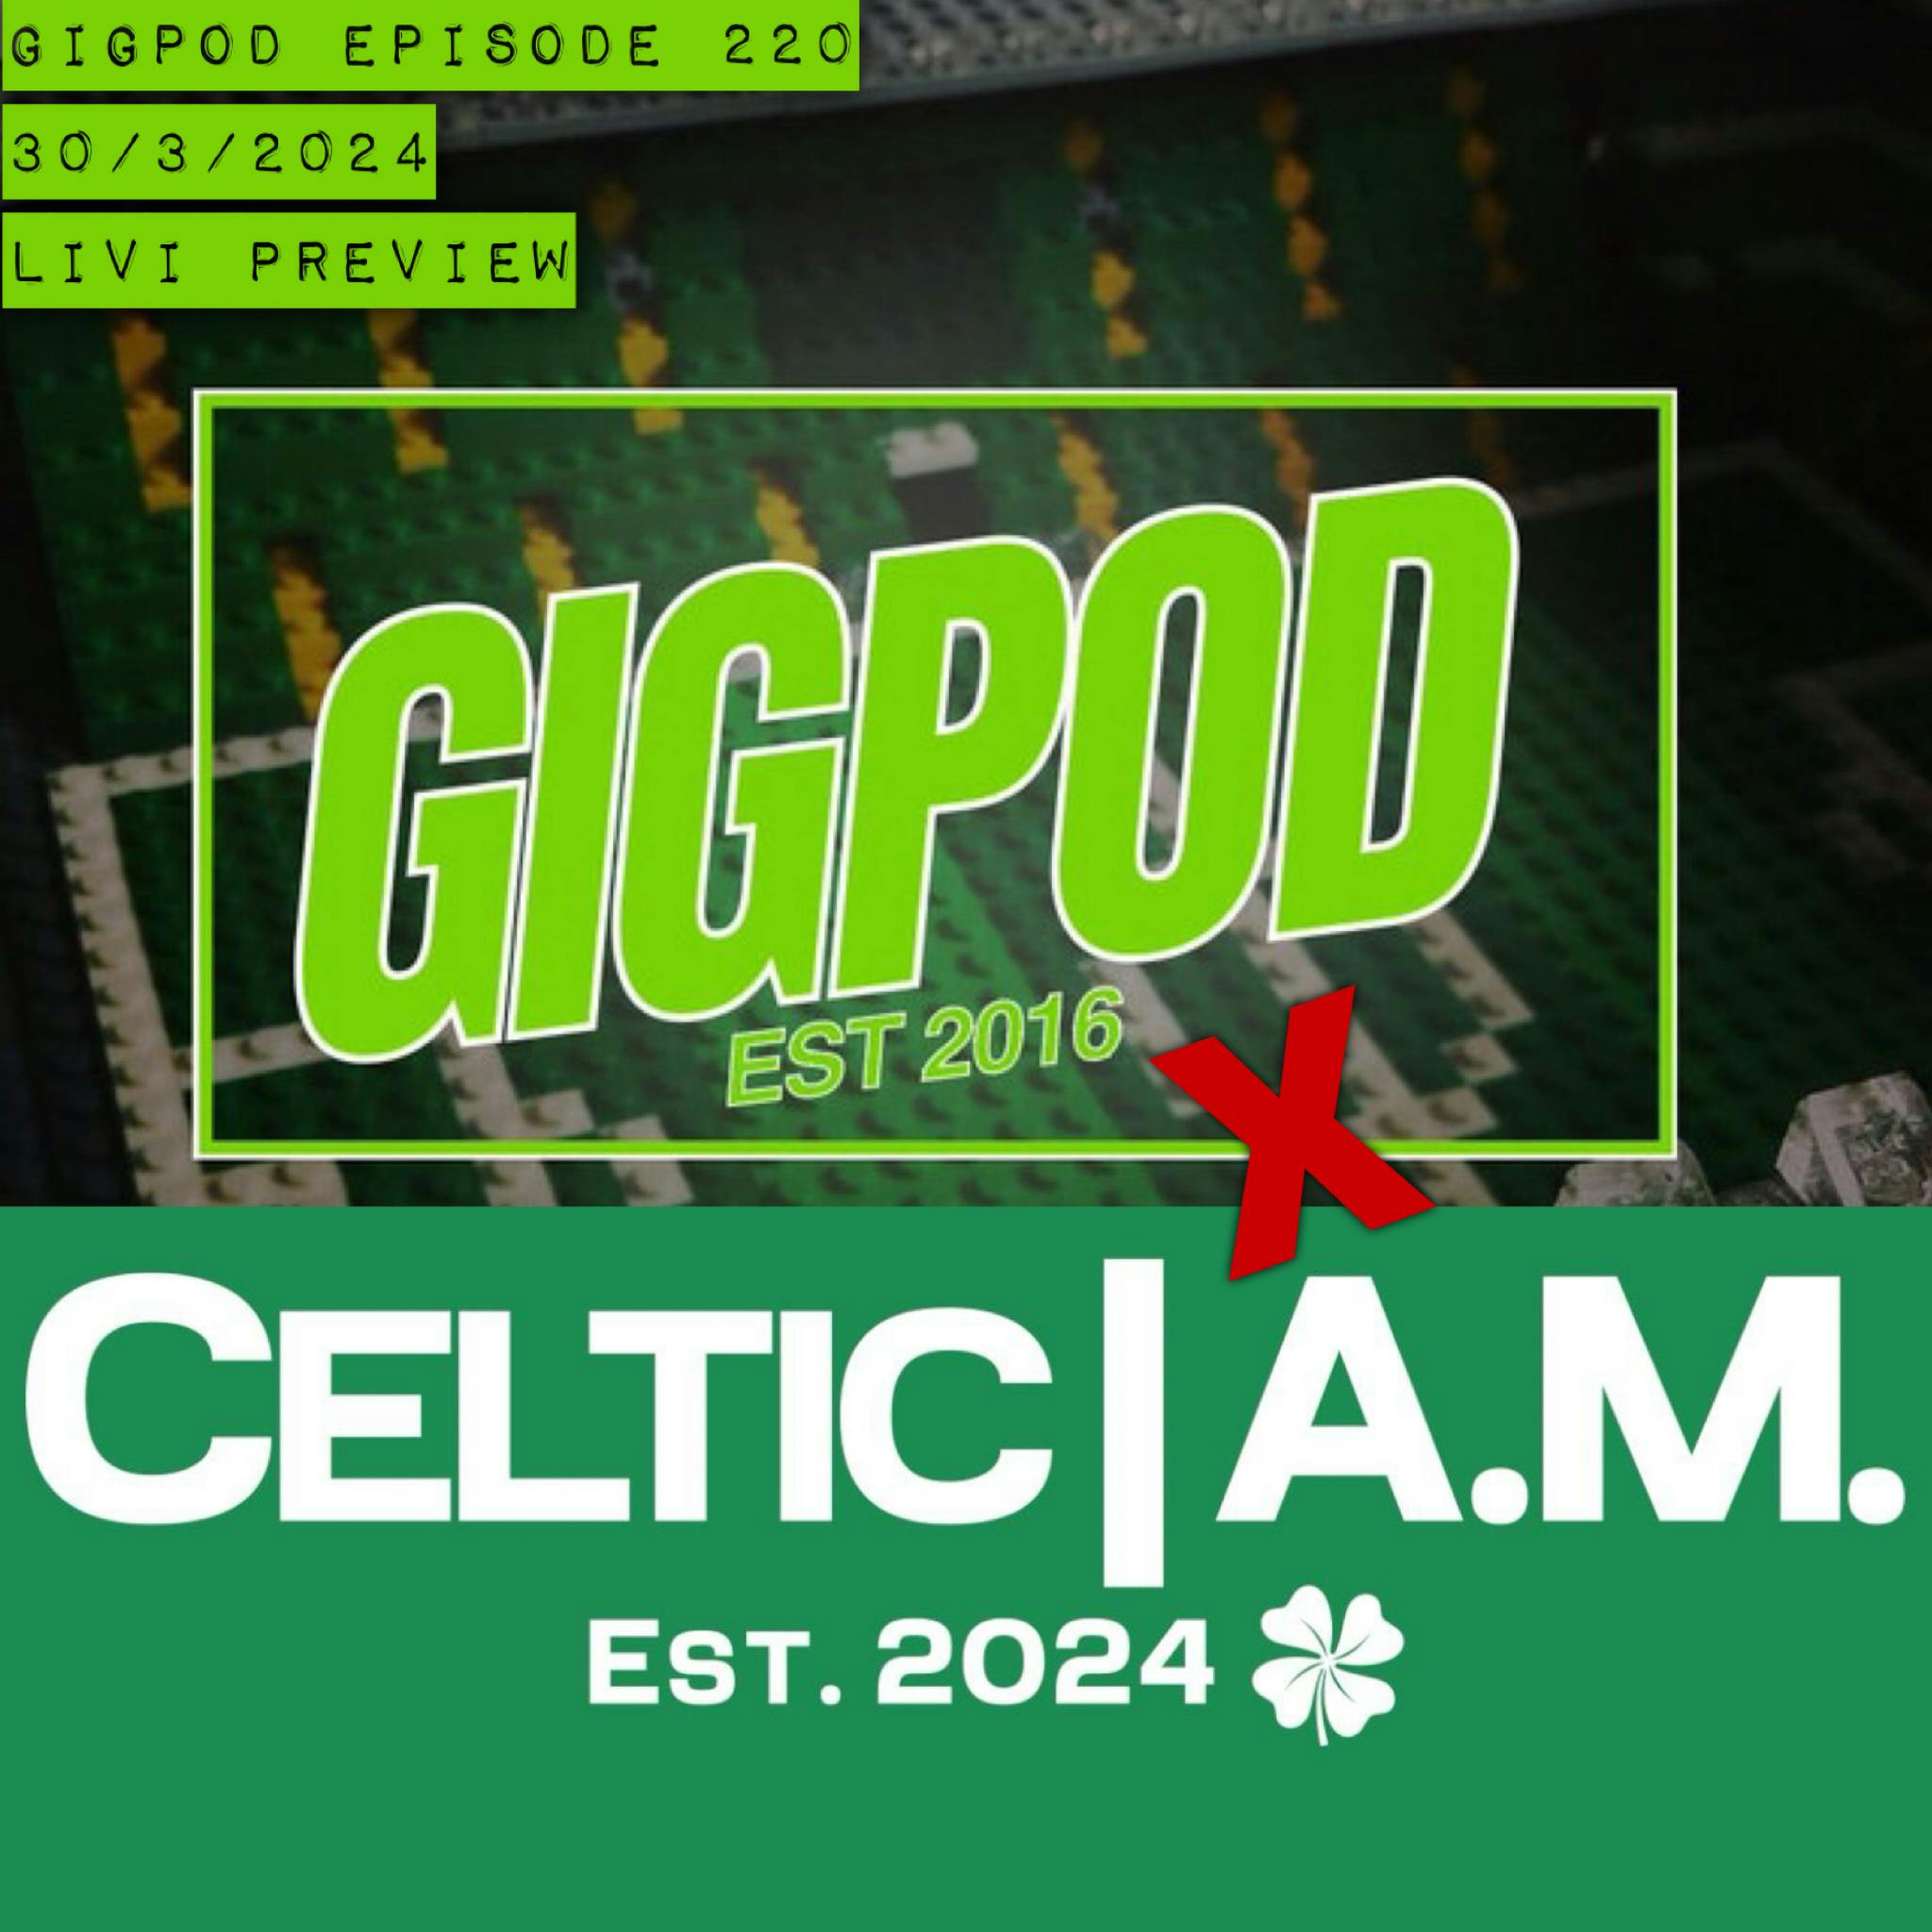 GIGPOD EP 220: LIVI PREVIEW (CELTIC AM CHAT)